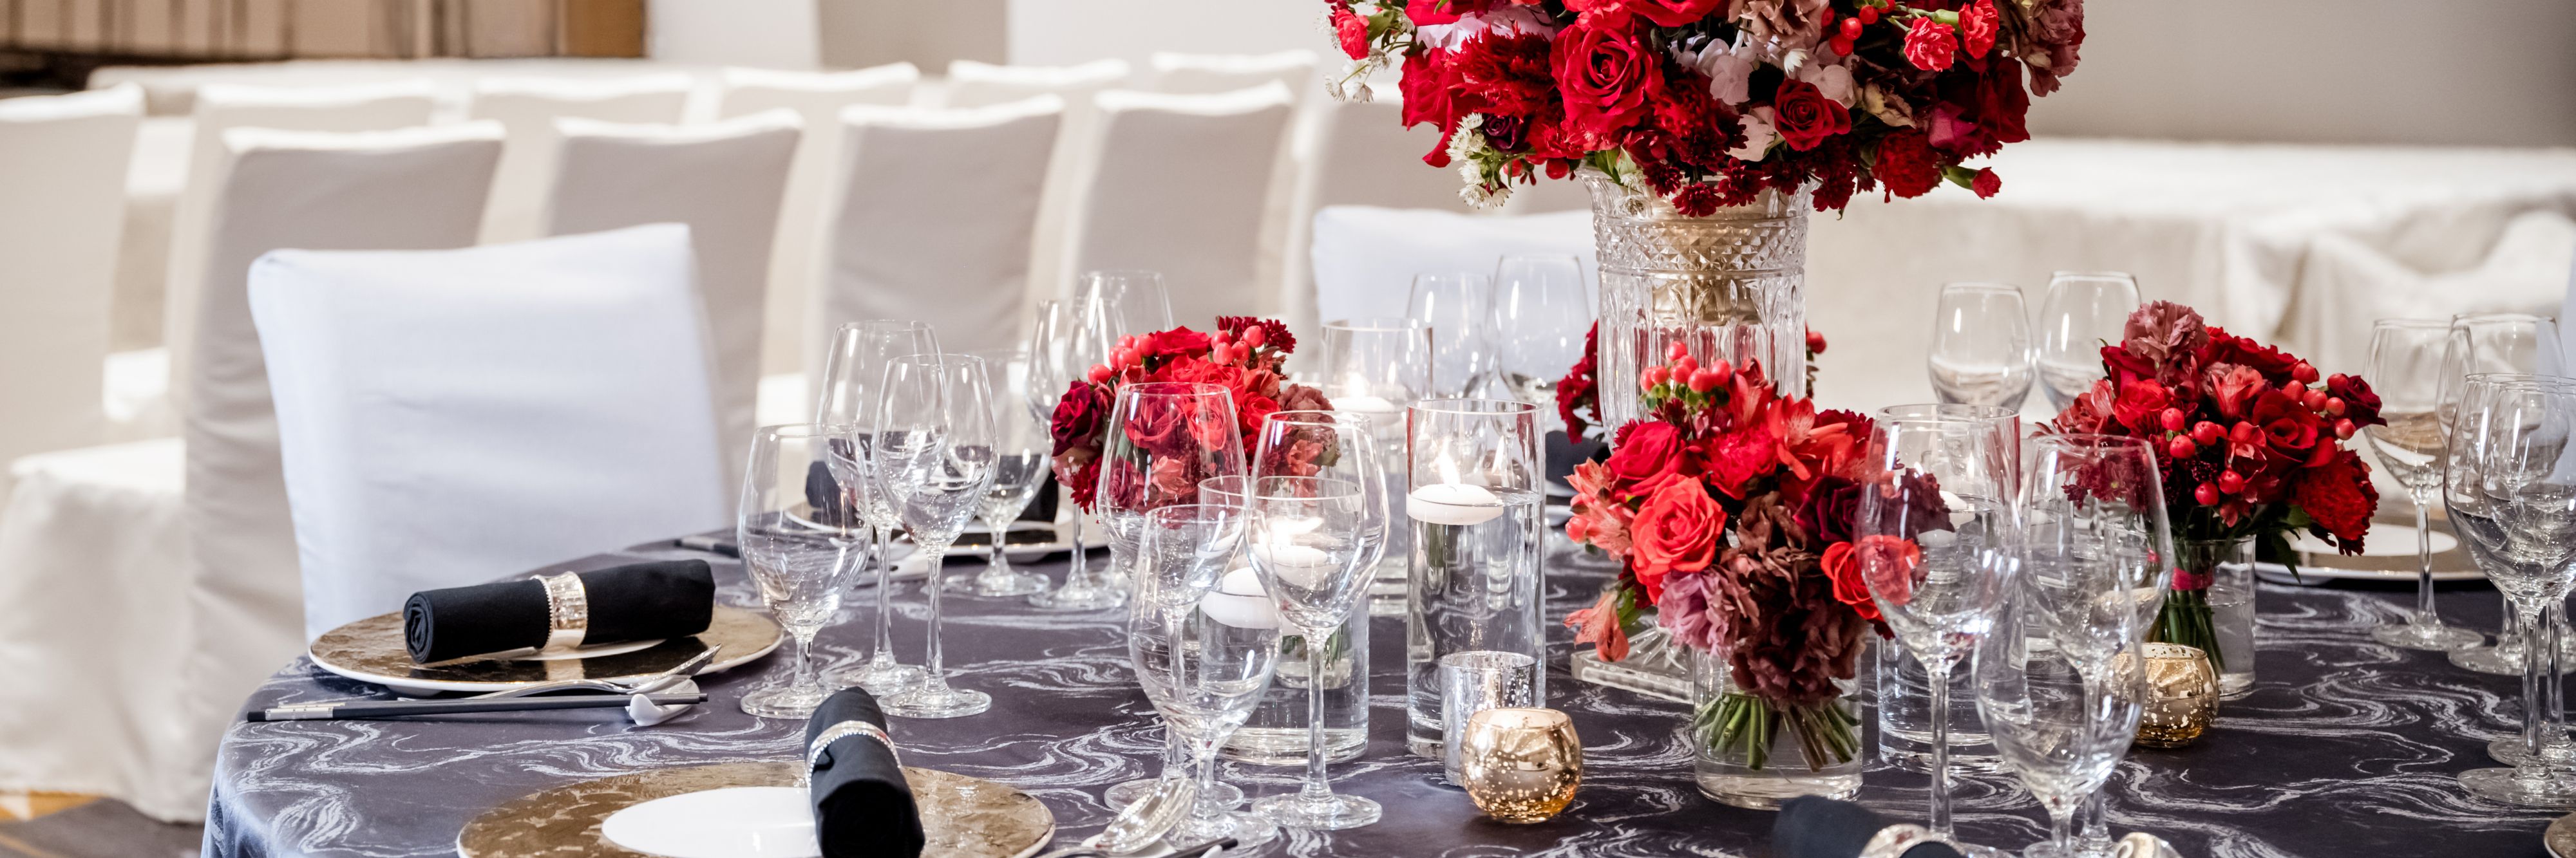 Wedding reception table with red flowers